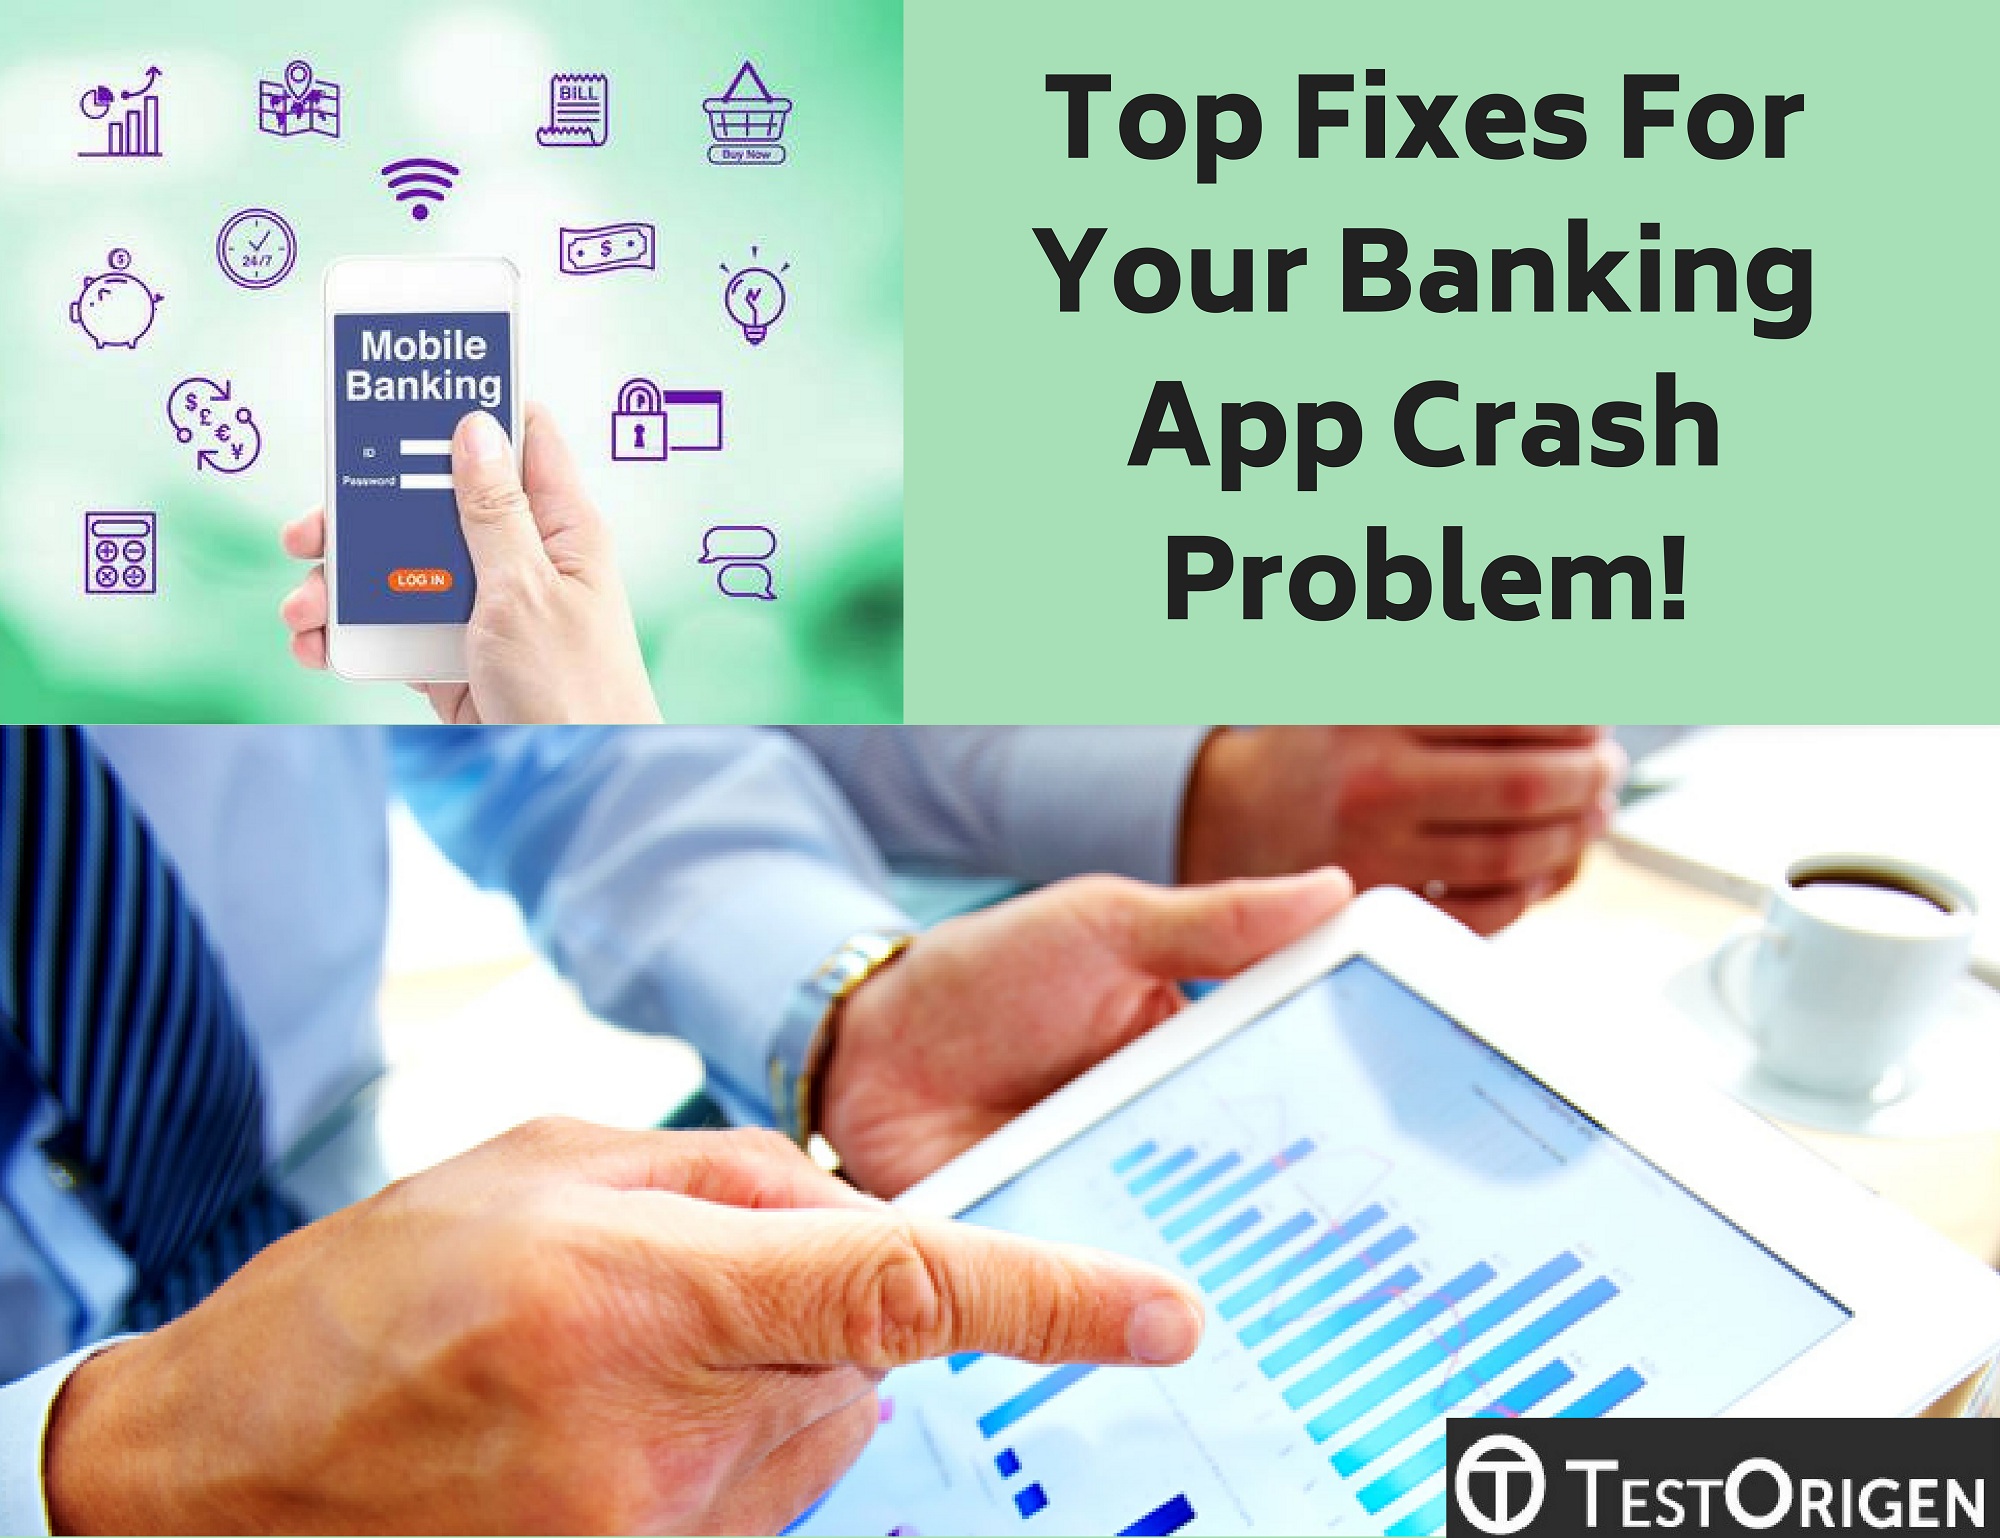 Top Fixes For Your Banking App Crash Problem!